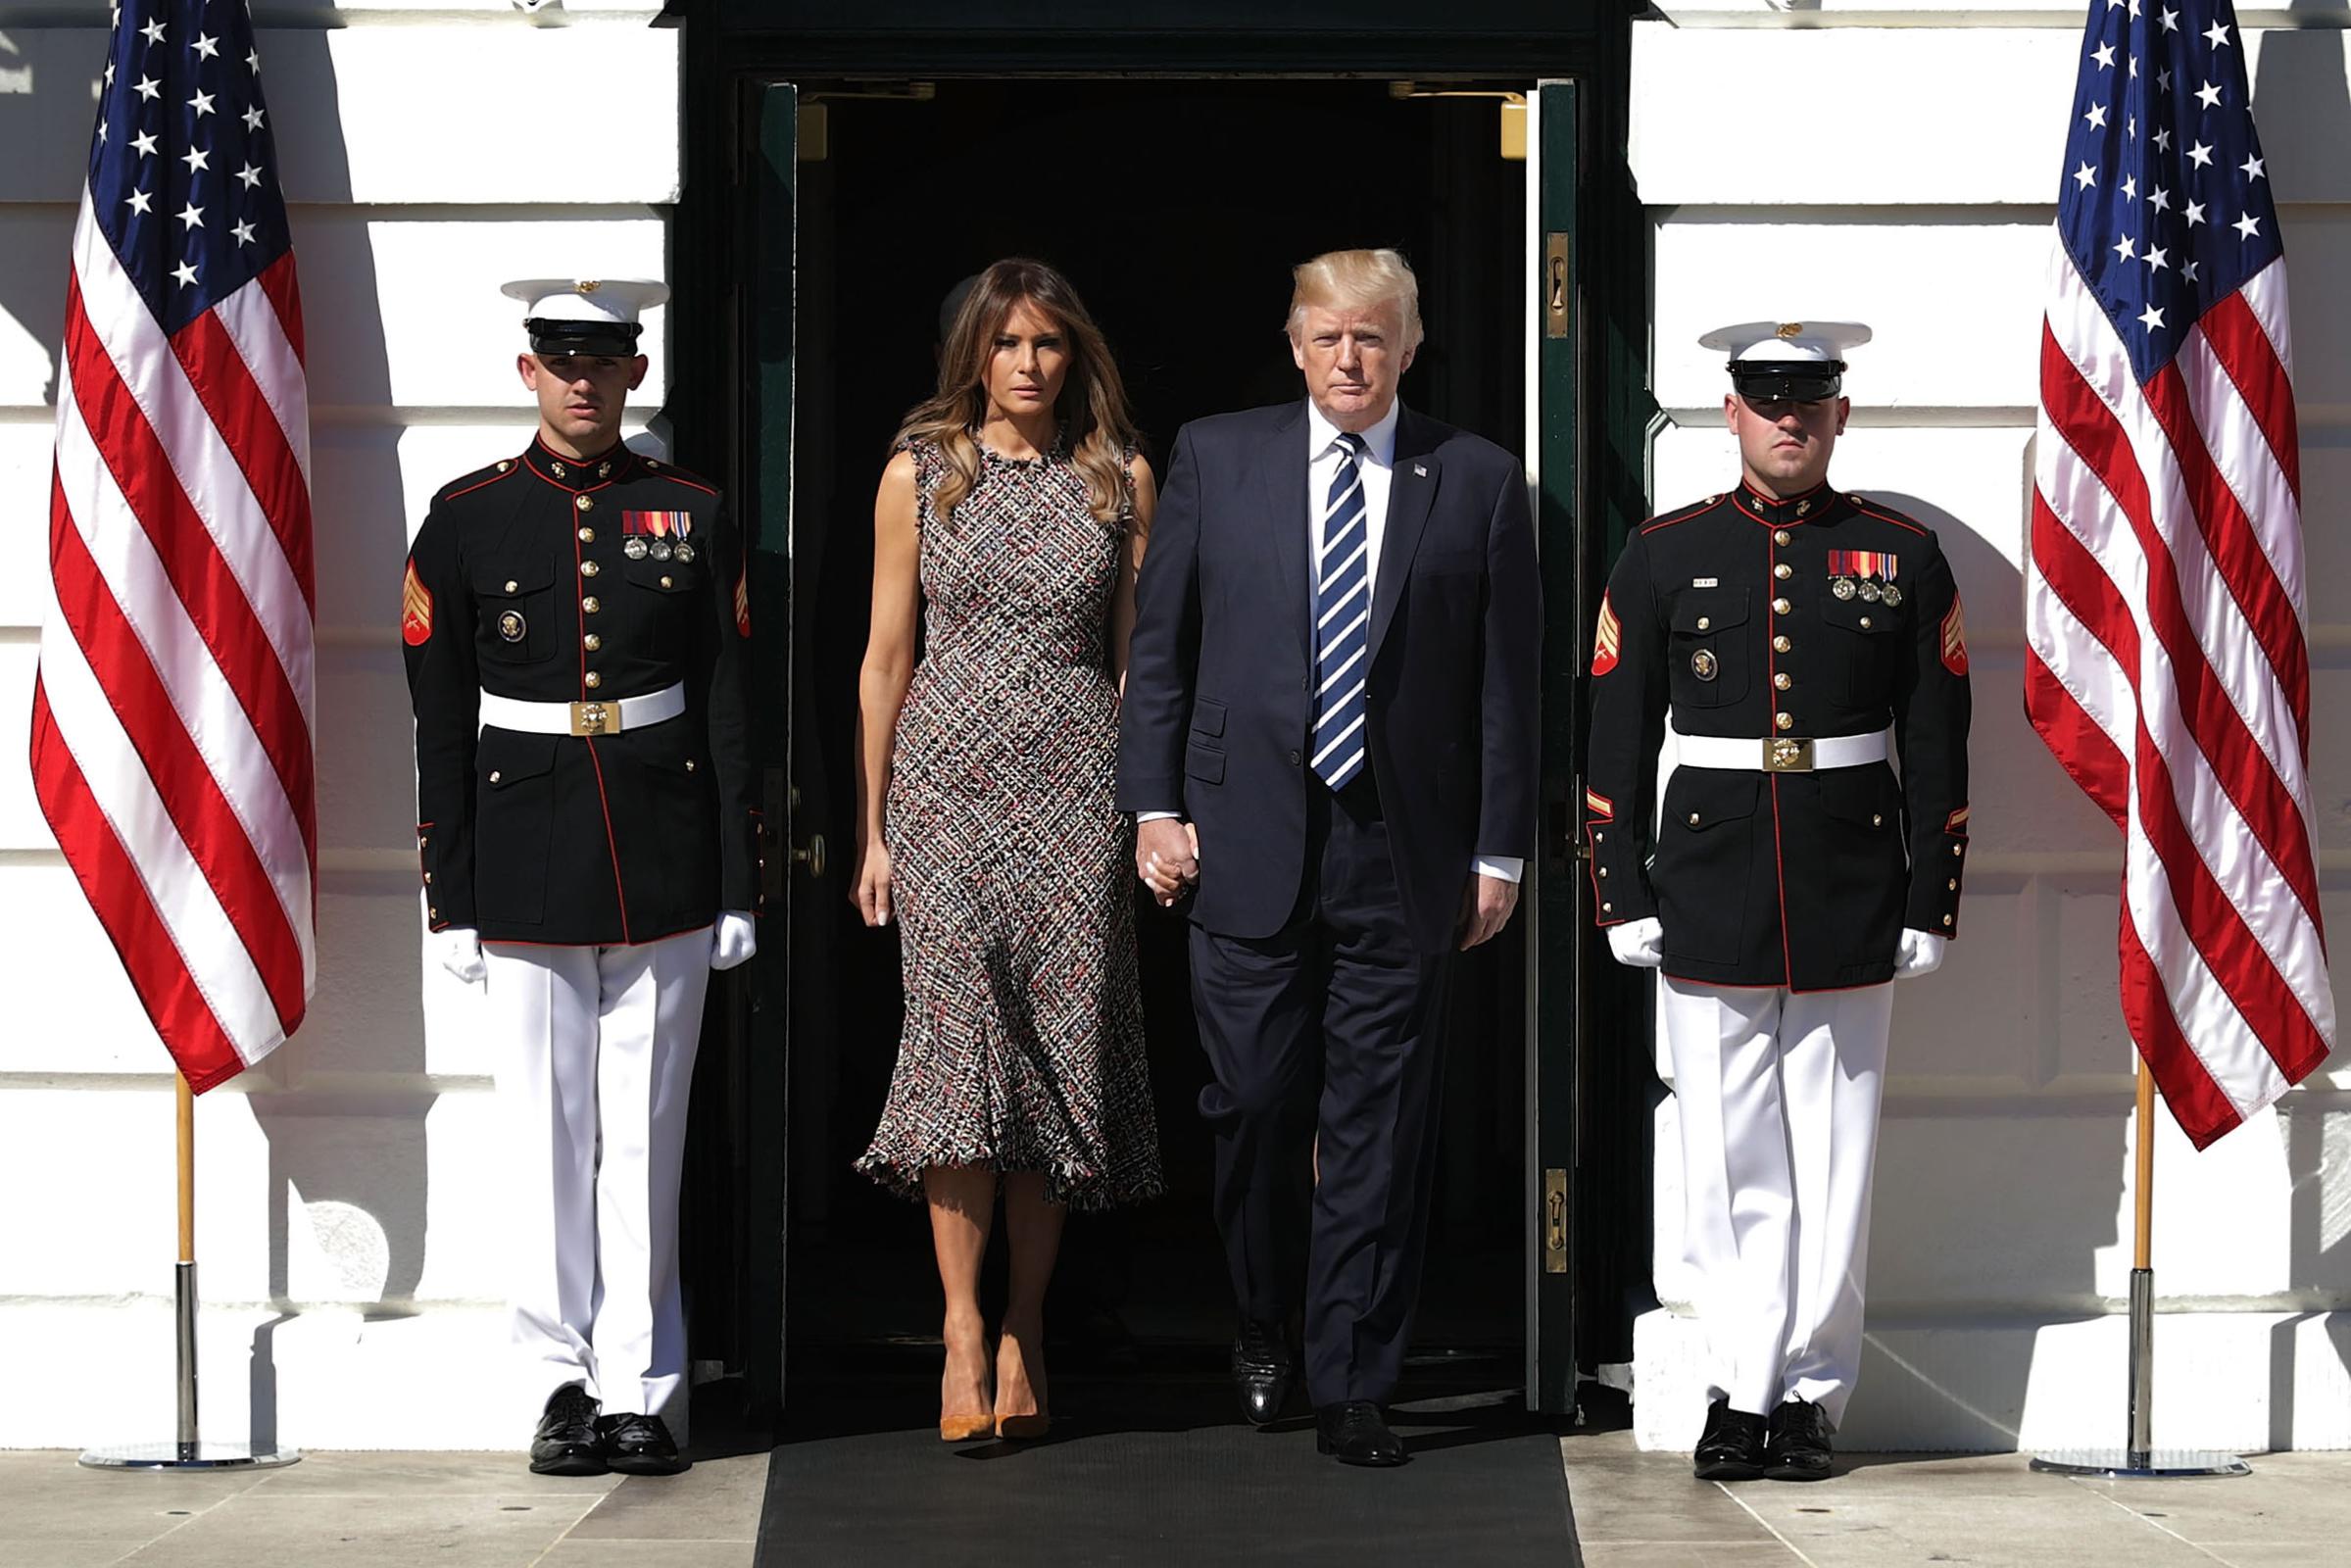 President Donald Trump (R) and first lady Melania Trump wearing a tweed midi dress, walk out of the White House before observing a moment of silence on the South Lawn October 2, 2017 in Washington, DC.